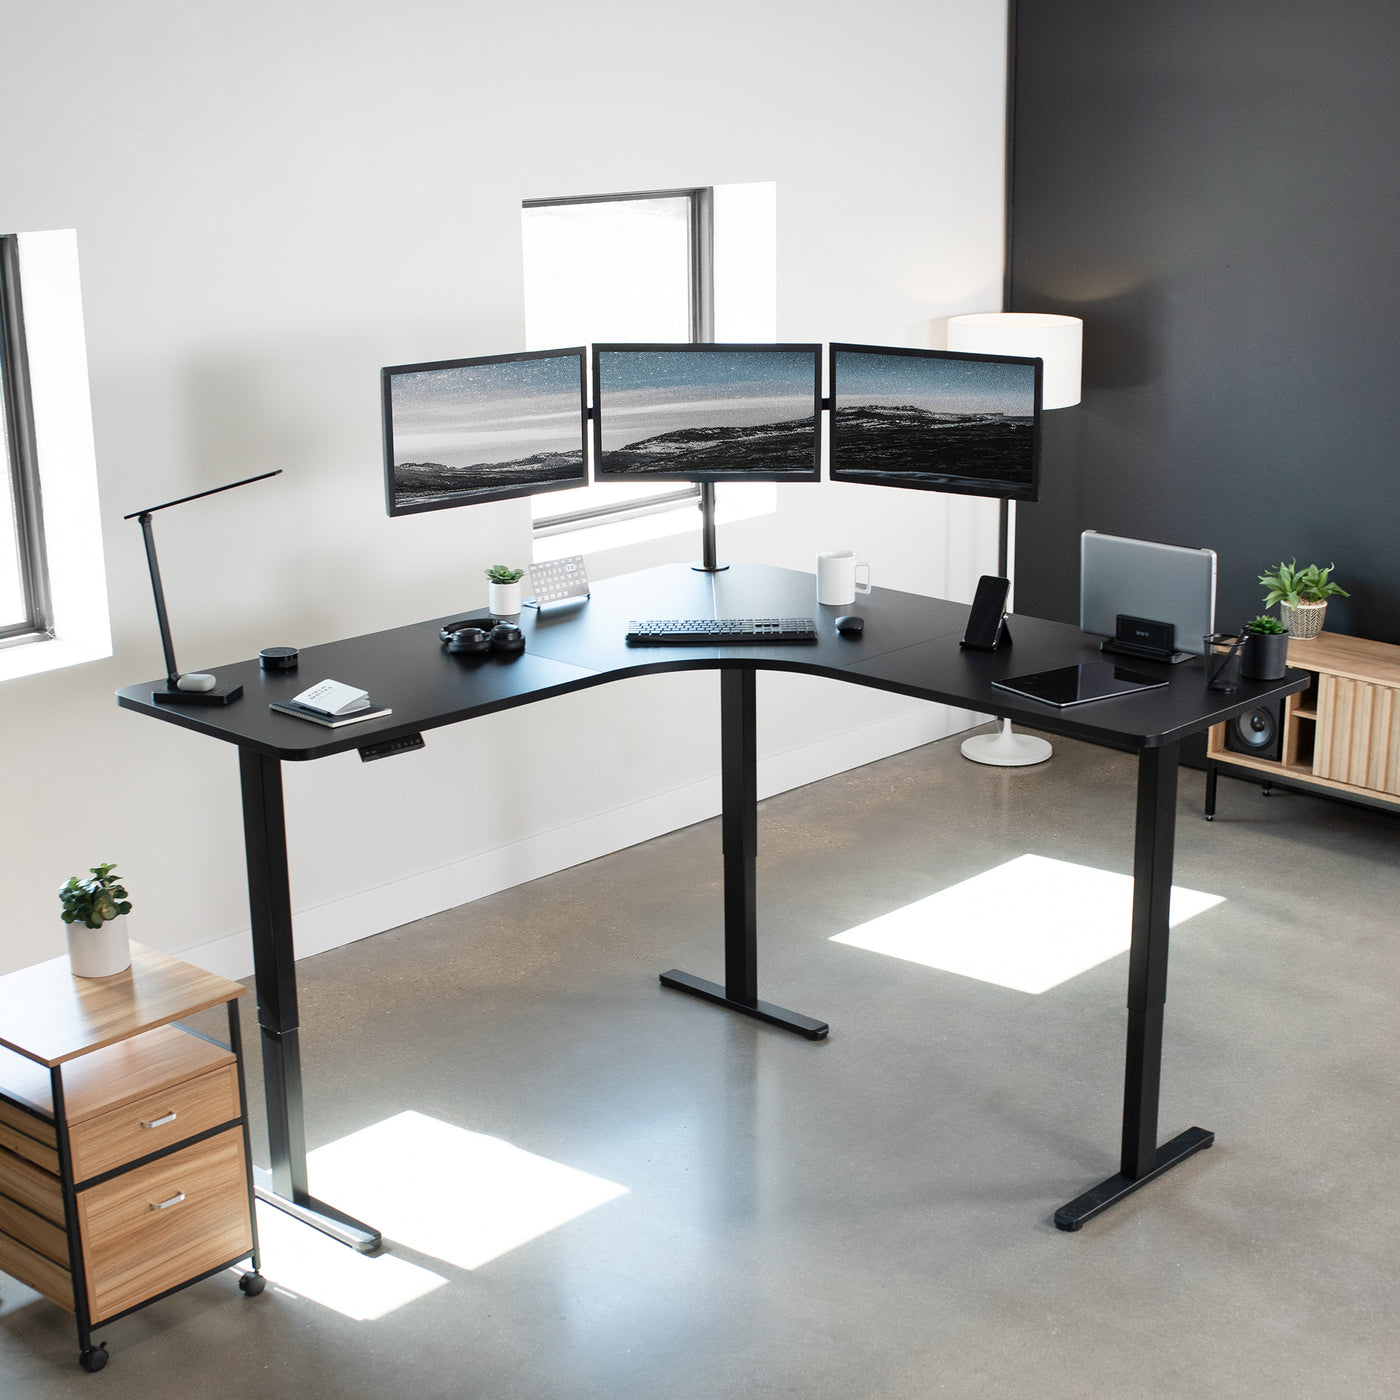 Standing desk in modern office space by windows with three monitors on the tabletop.